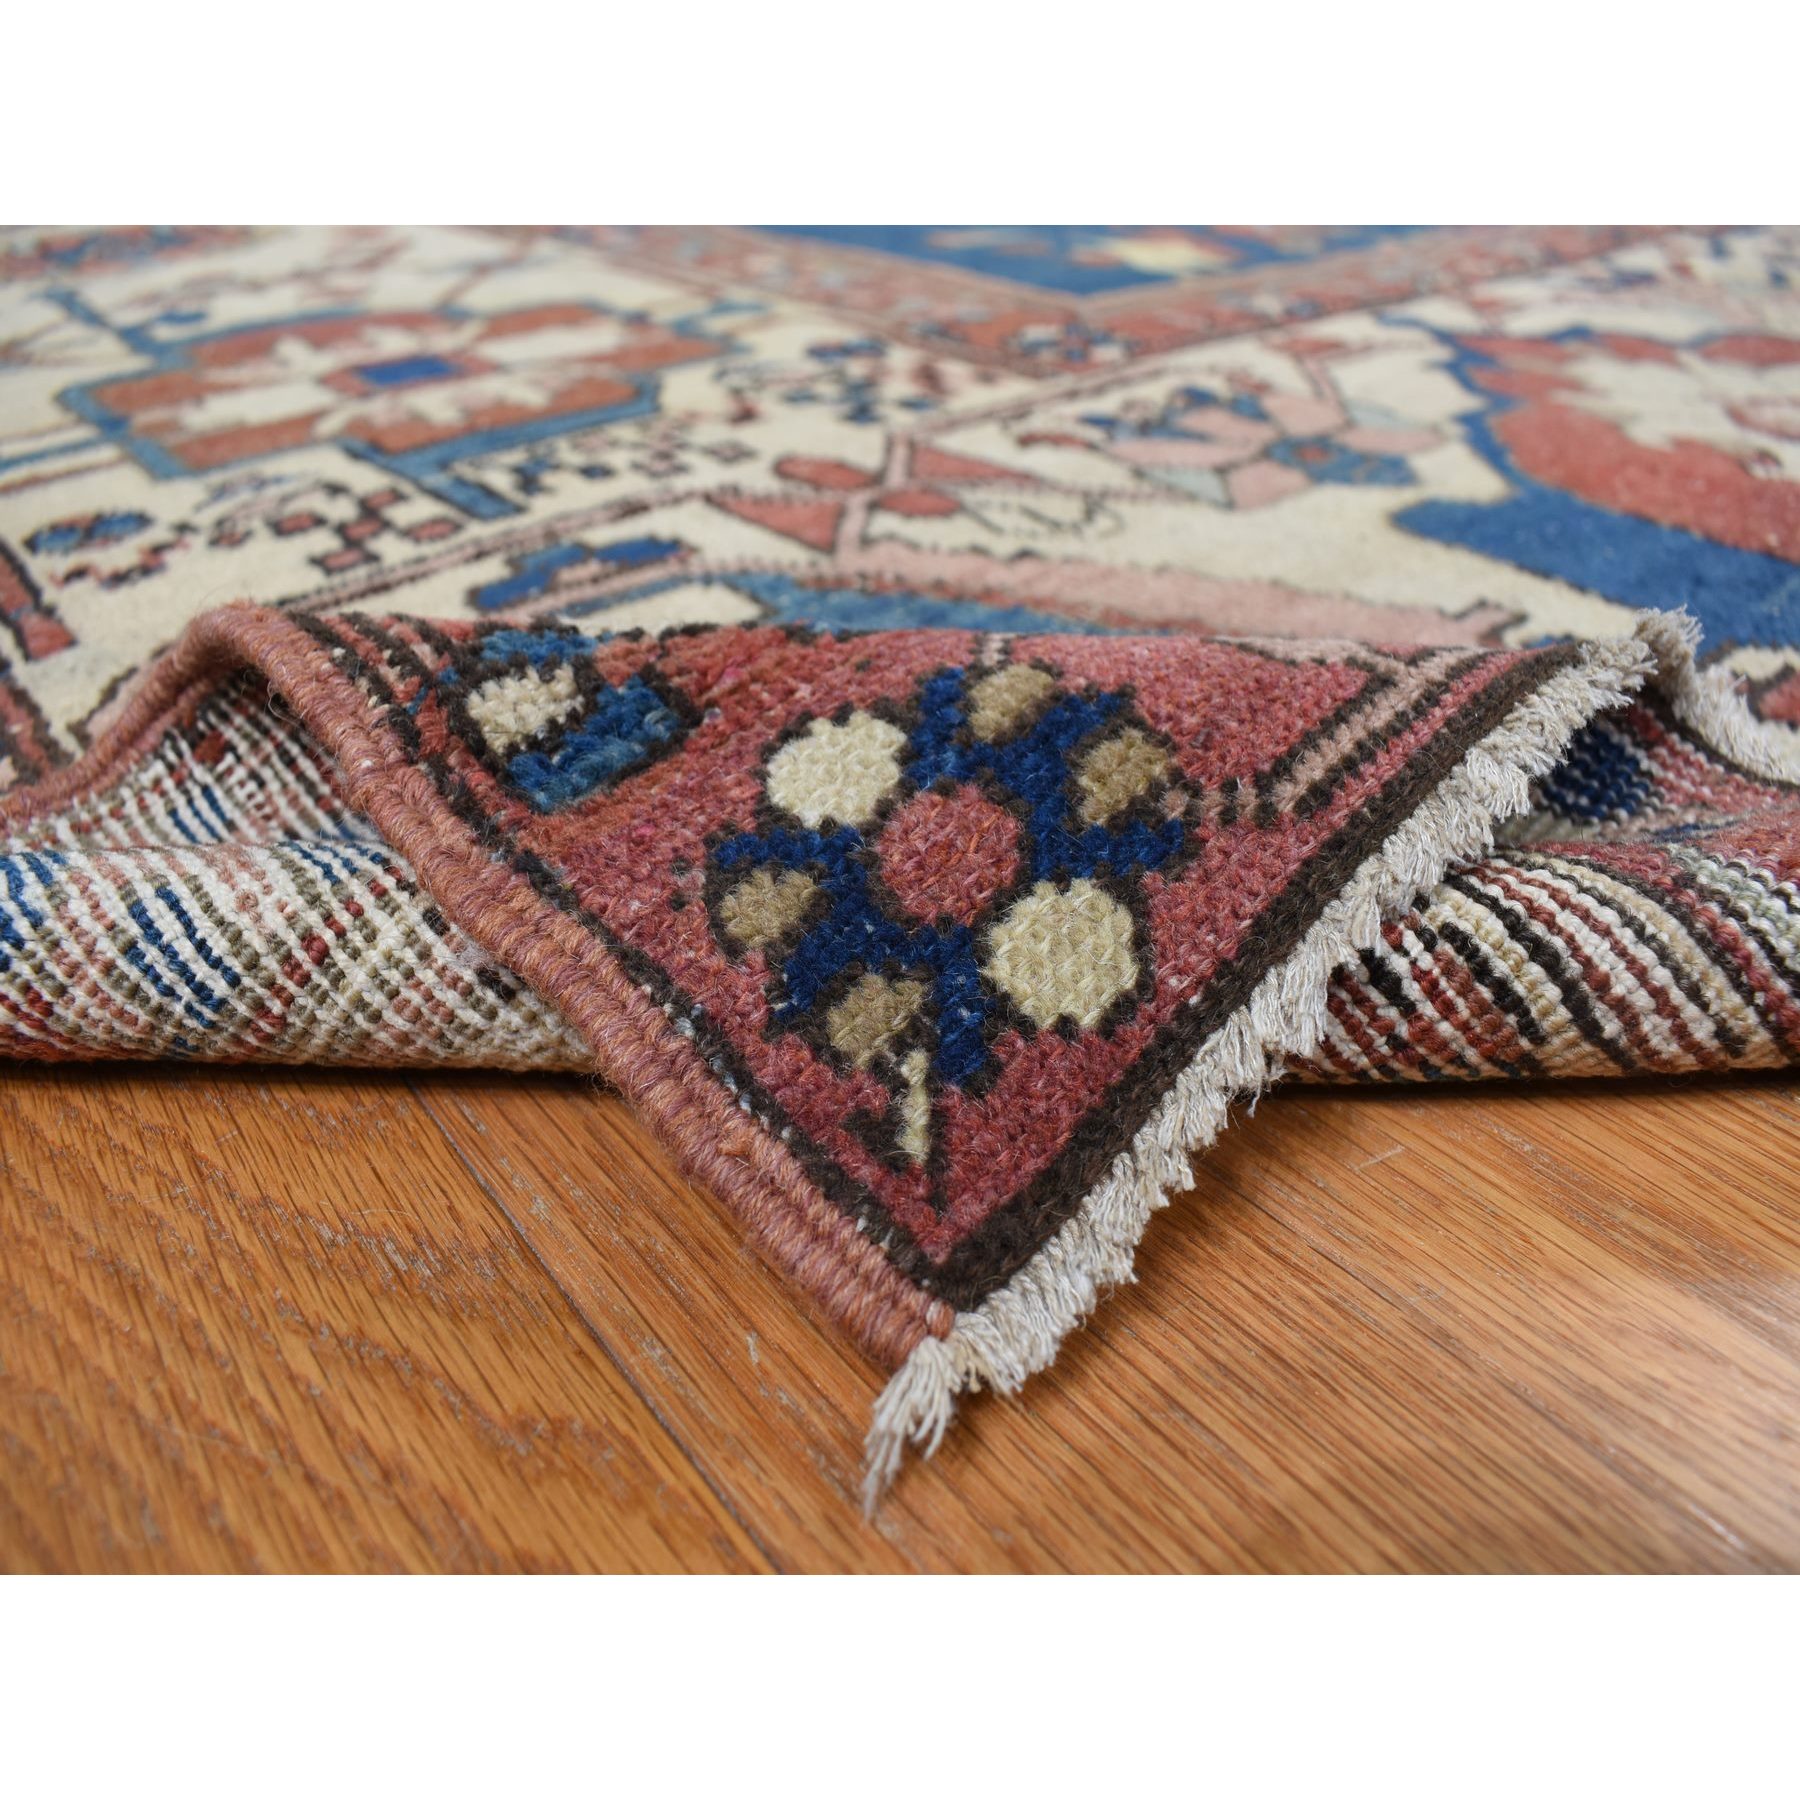  Wool Hand-Knotted Area Rug 11'3